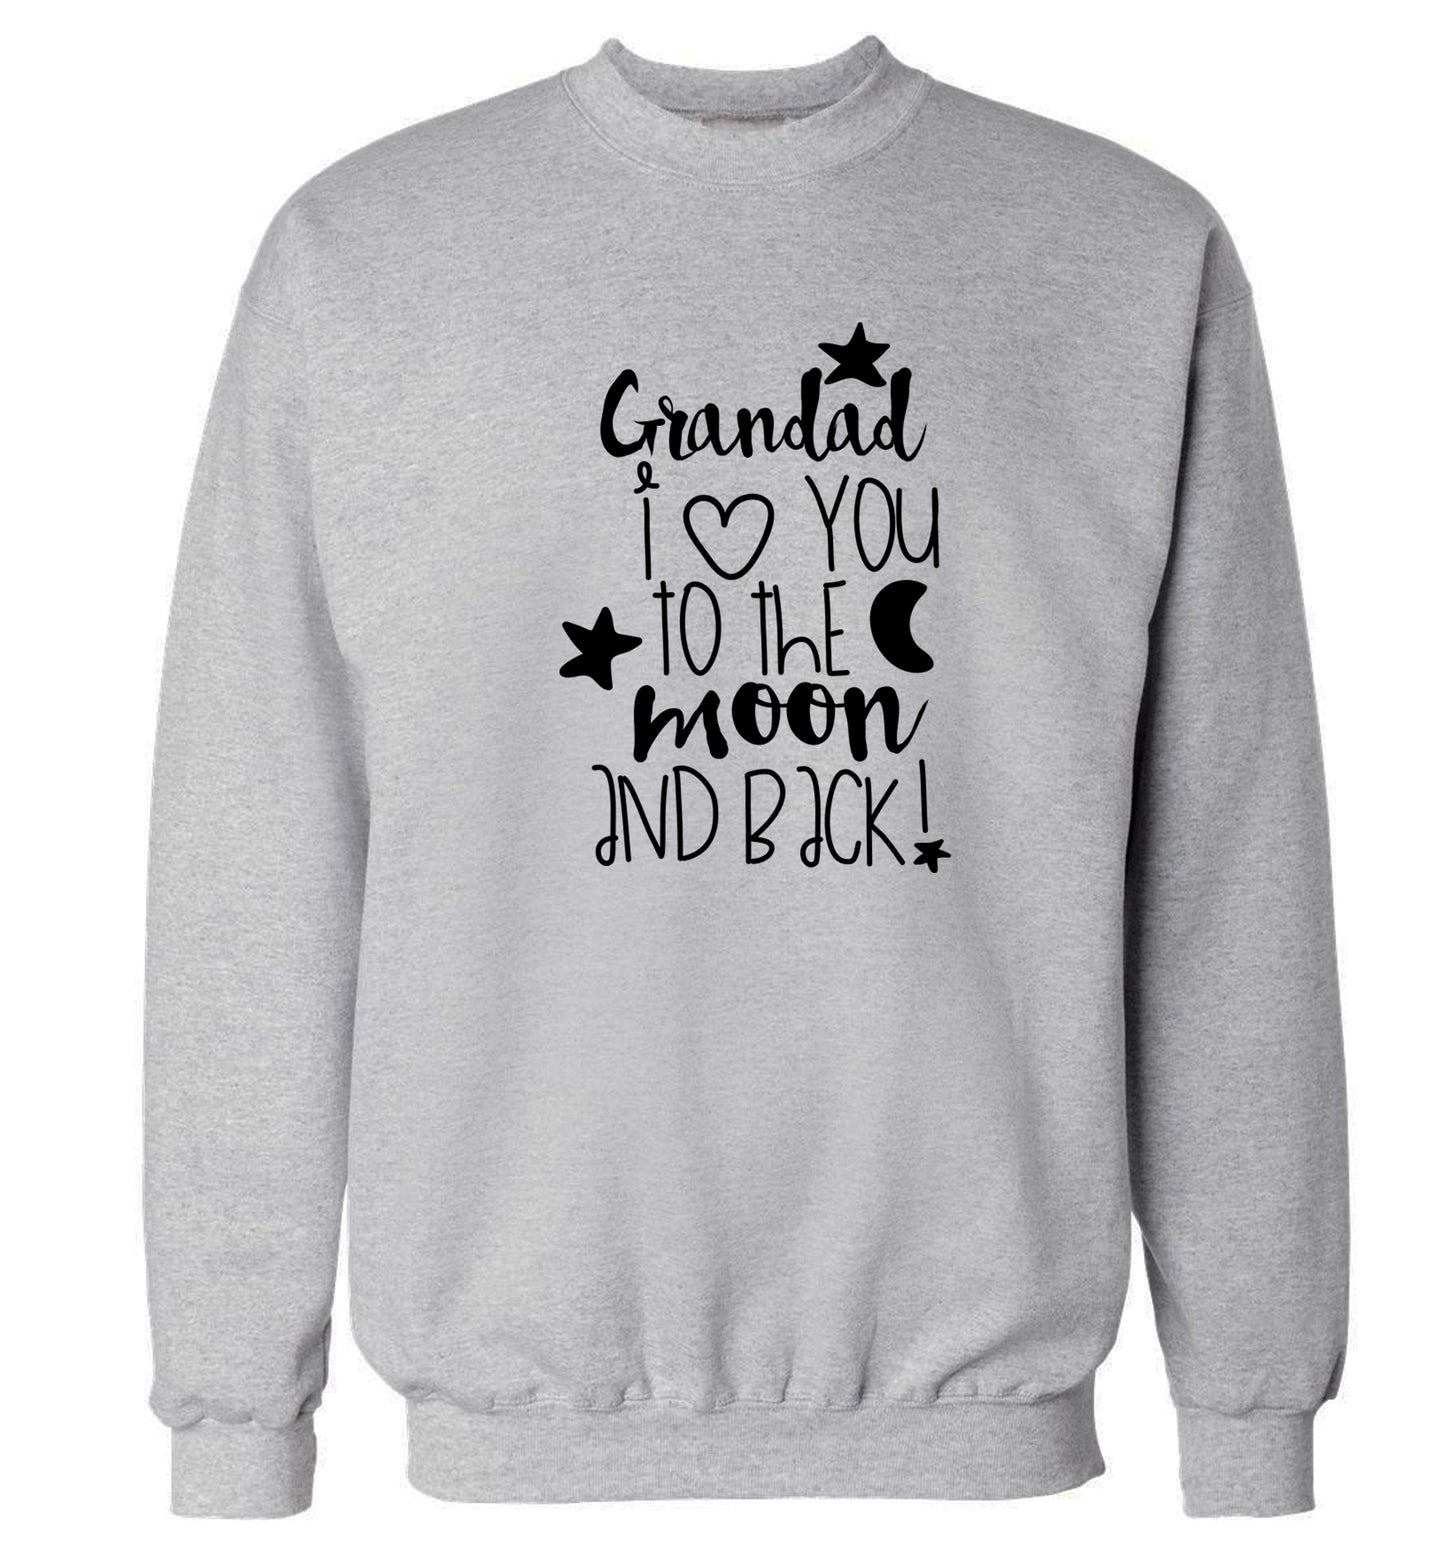 Grandad's I love you to the moon and back Adult's unisex grey  sweater 2XL